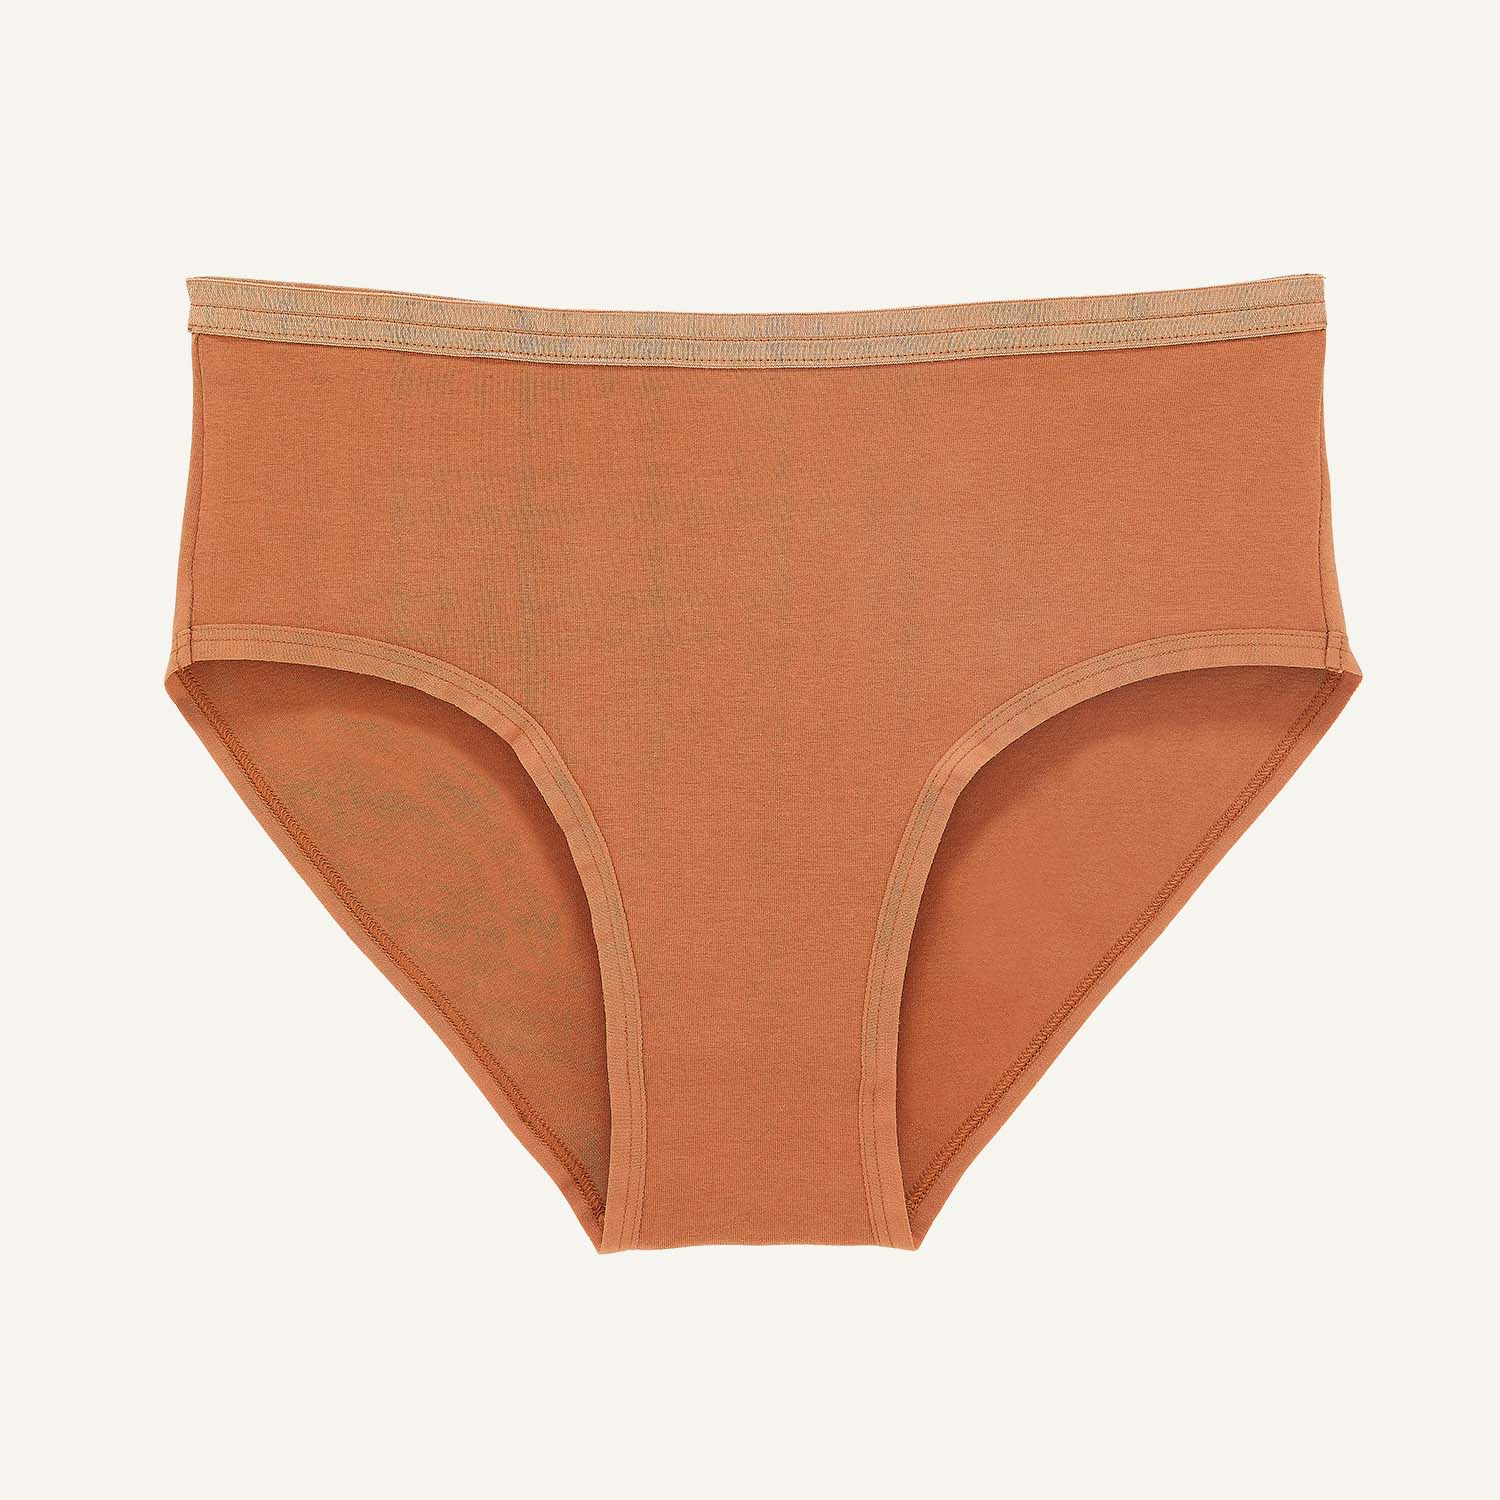 organic cotton underwear nude color for brown skin